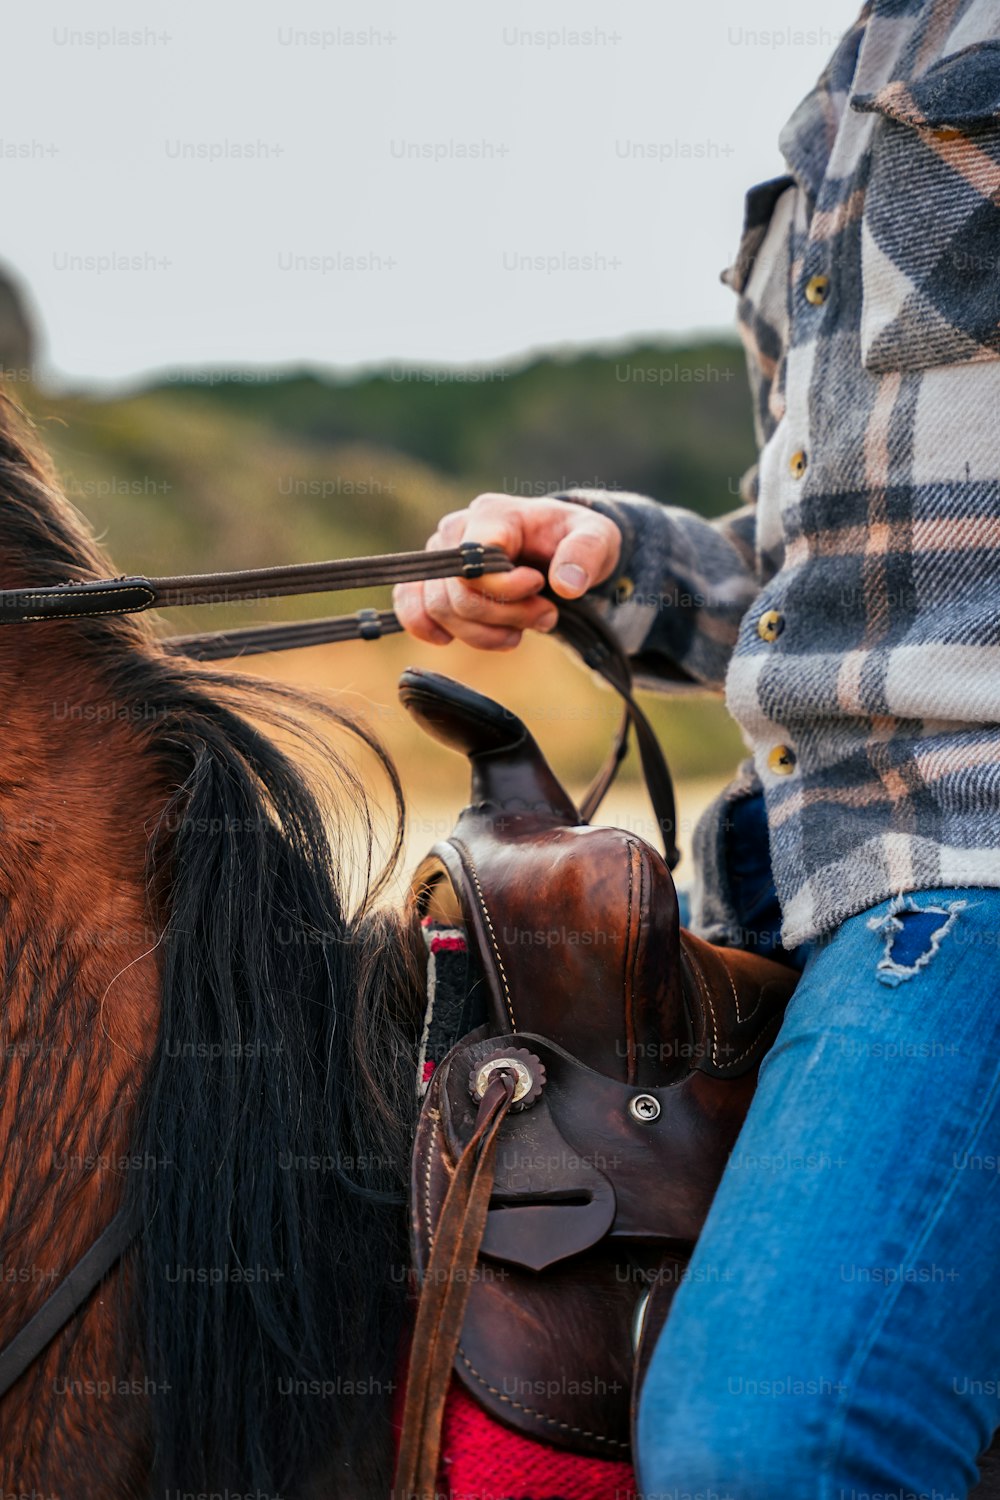 a close up of a person riding a horse